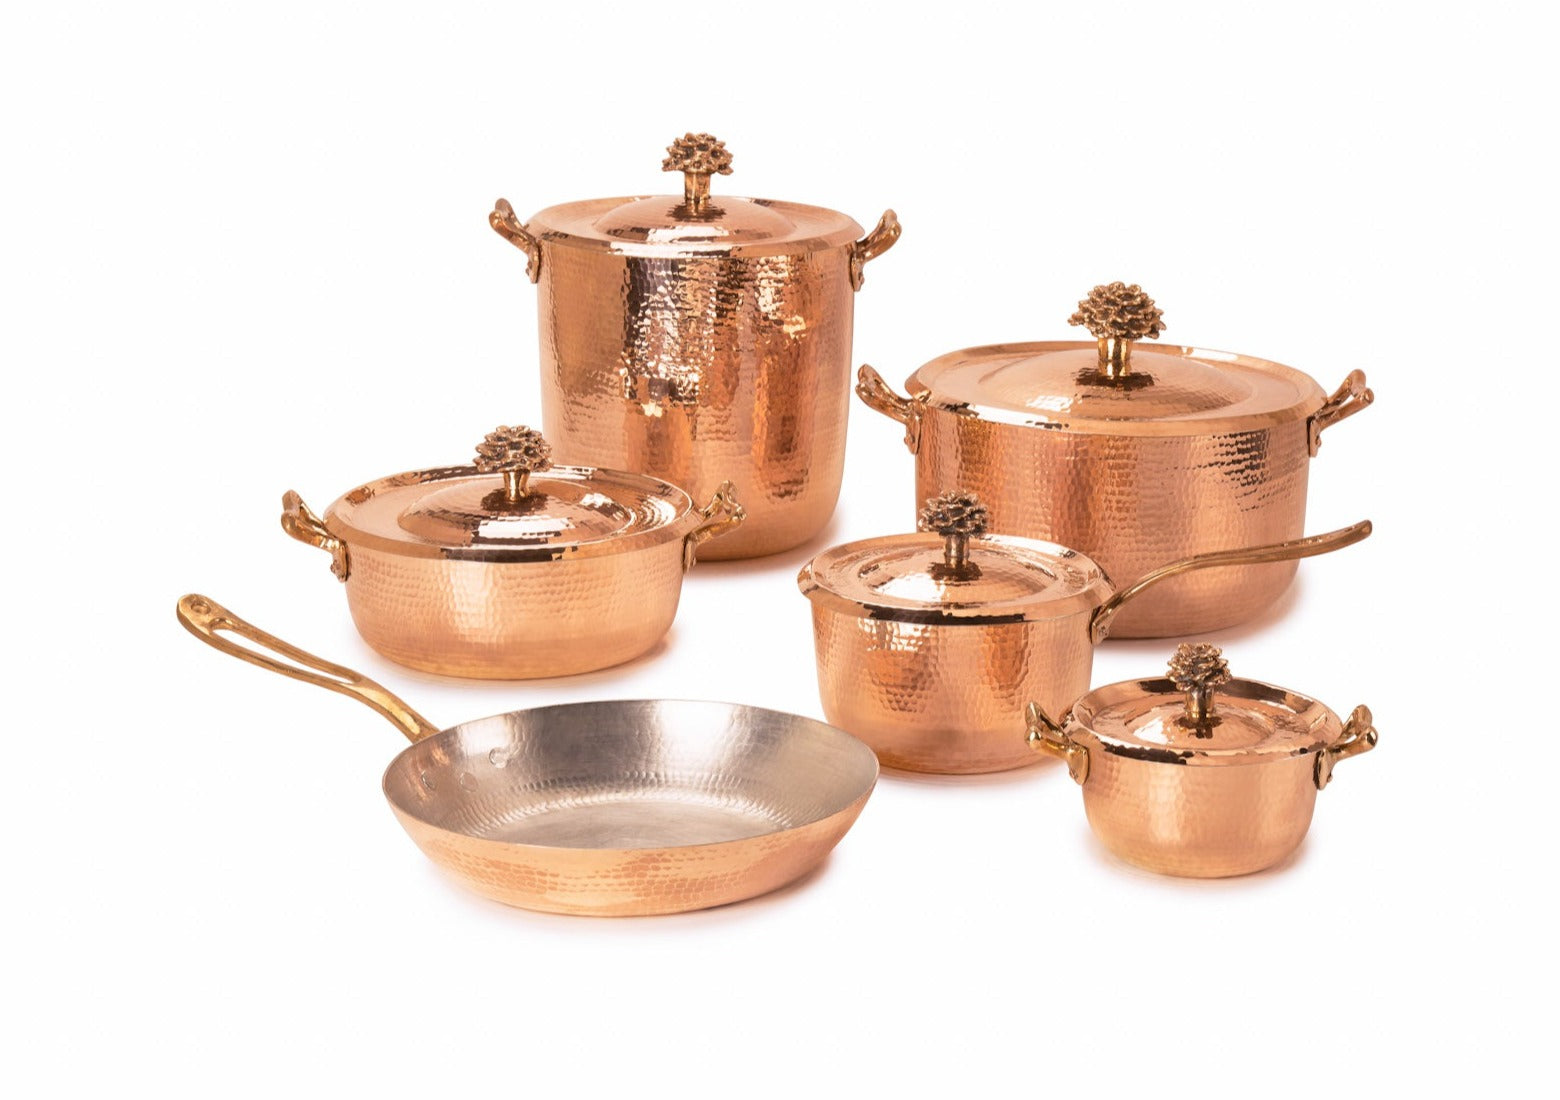 Large 10 qt Hammered Copper Dutch Oven - Amoretti Brothers